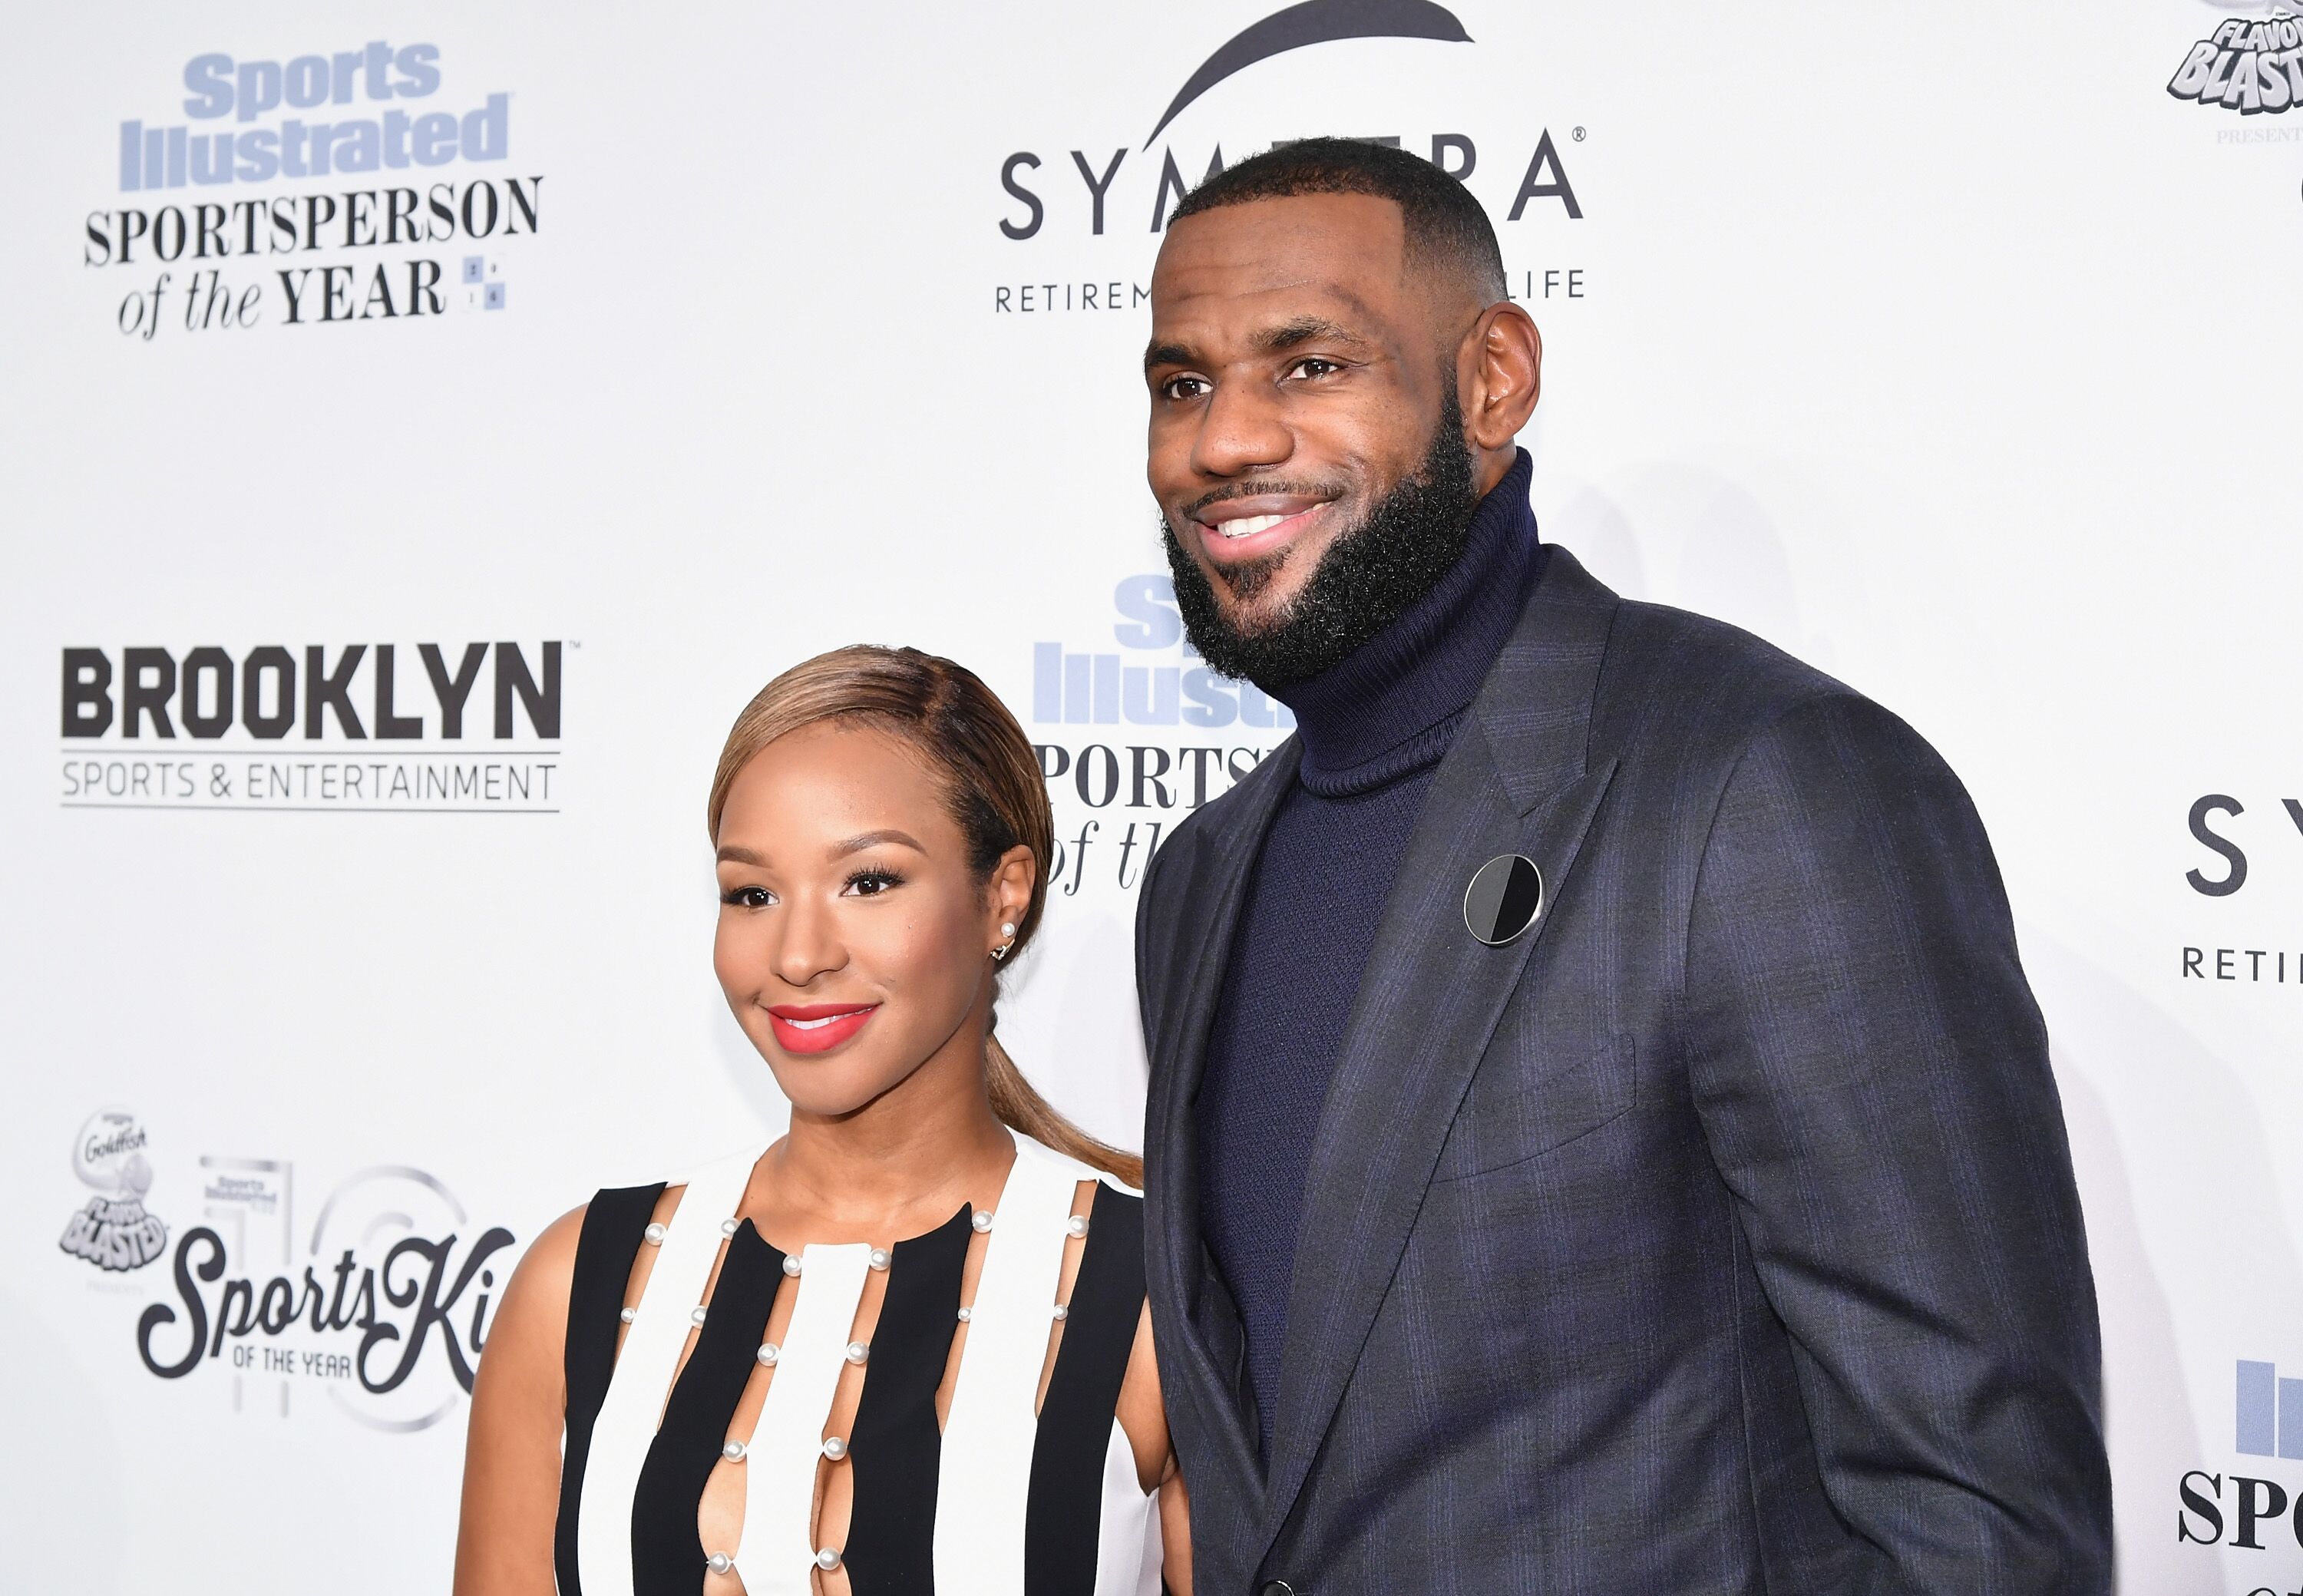 Savannah and LeBron James at the Sports Illustrated Sportsperson on the Year Awards | Source: Getty Images